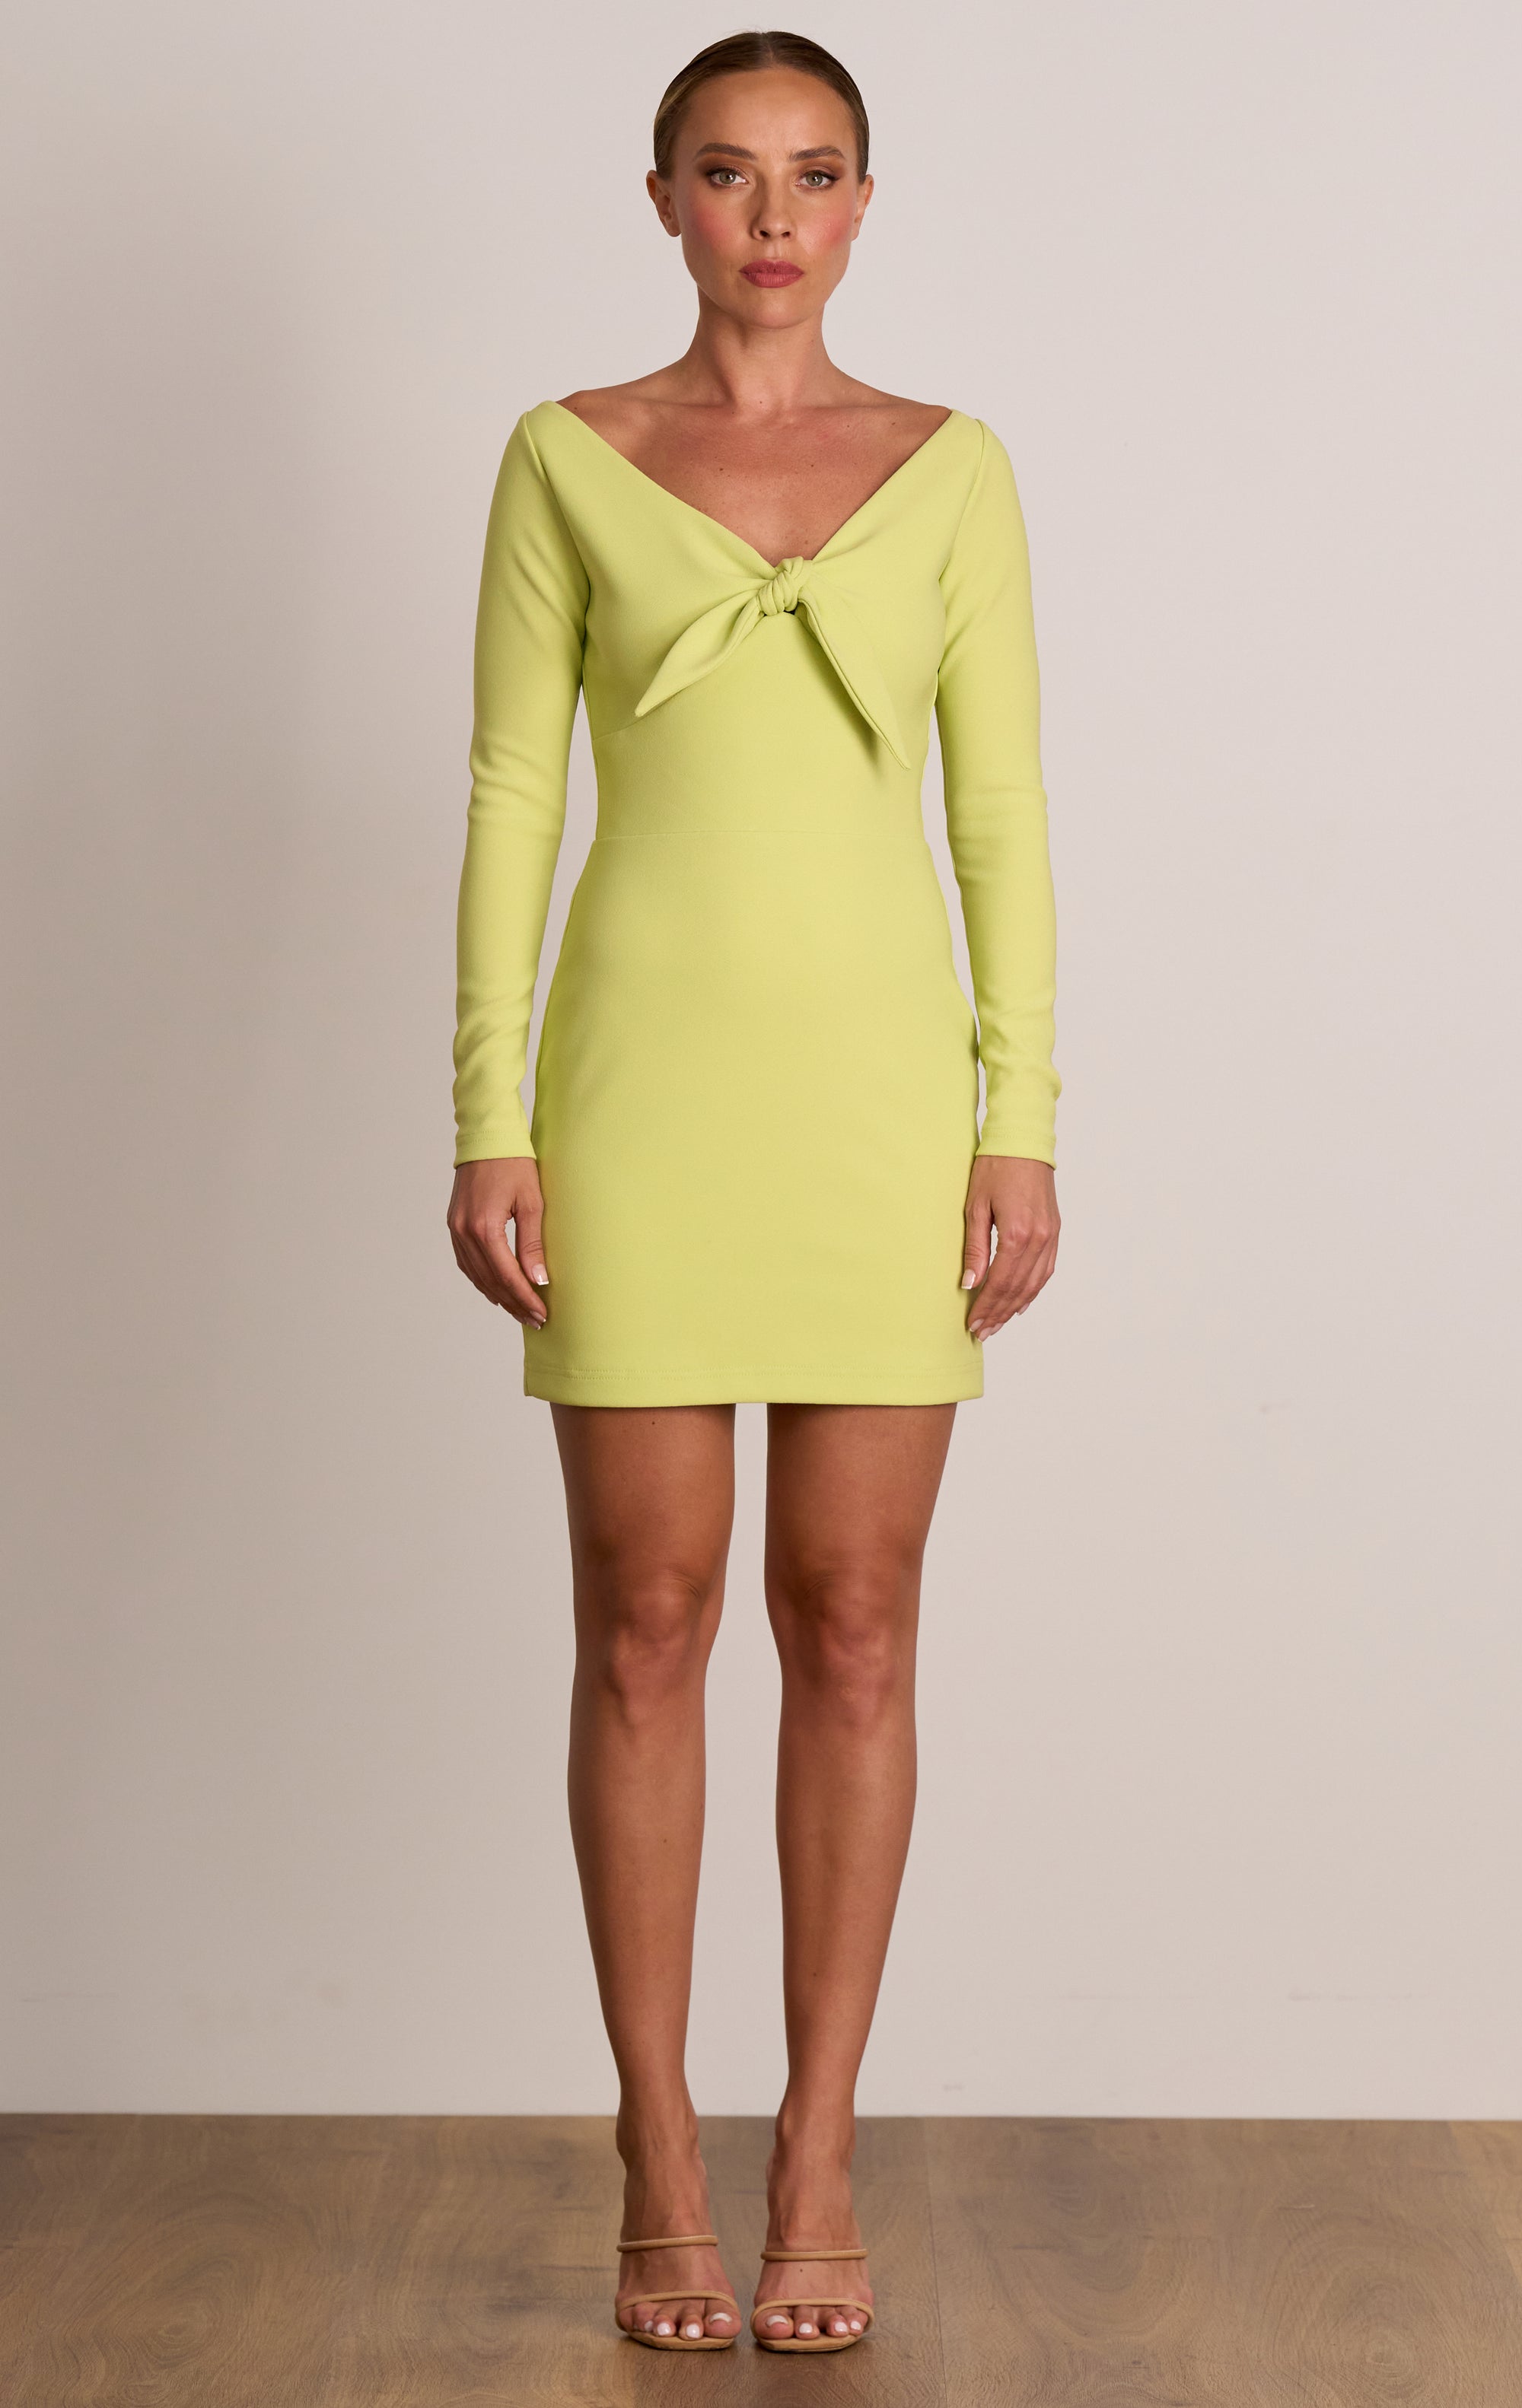 Ray Of Light Dress - TAKE 40% OFF DISCOUNT APPLIED AT CHECKOUT